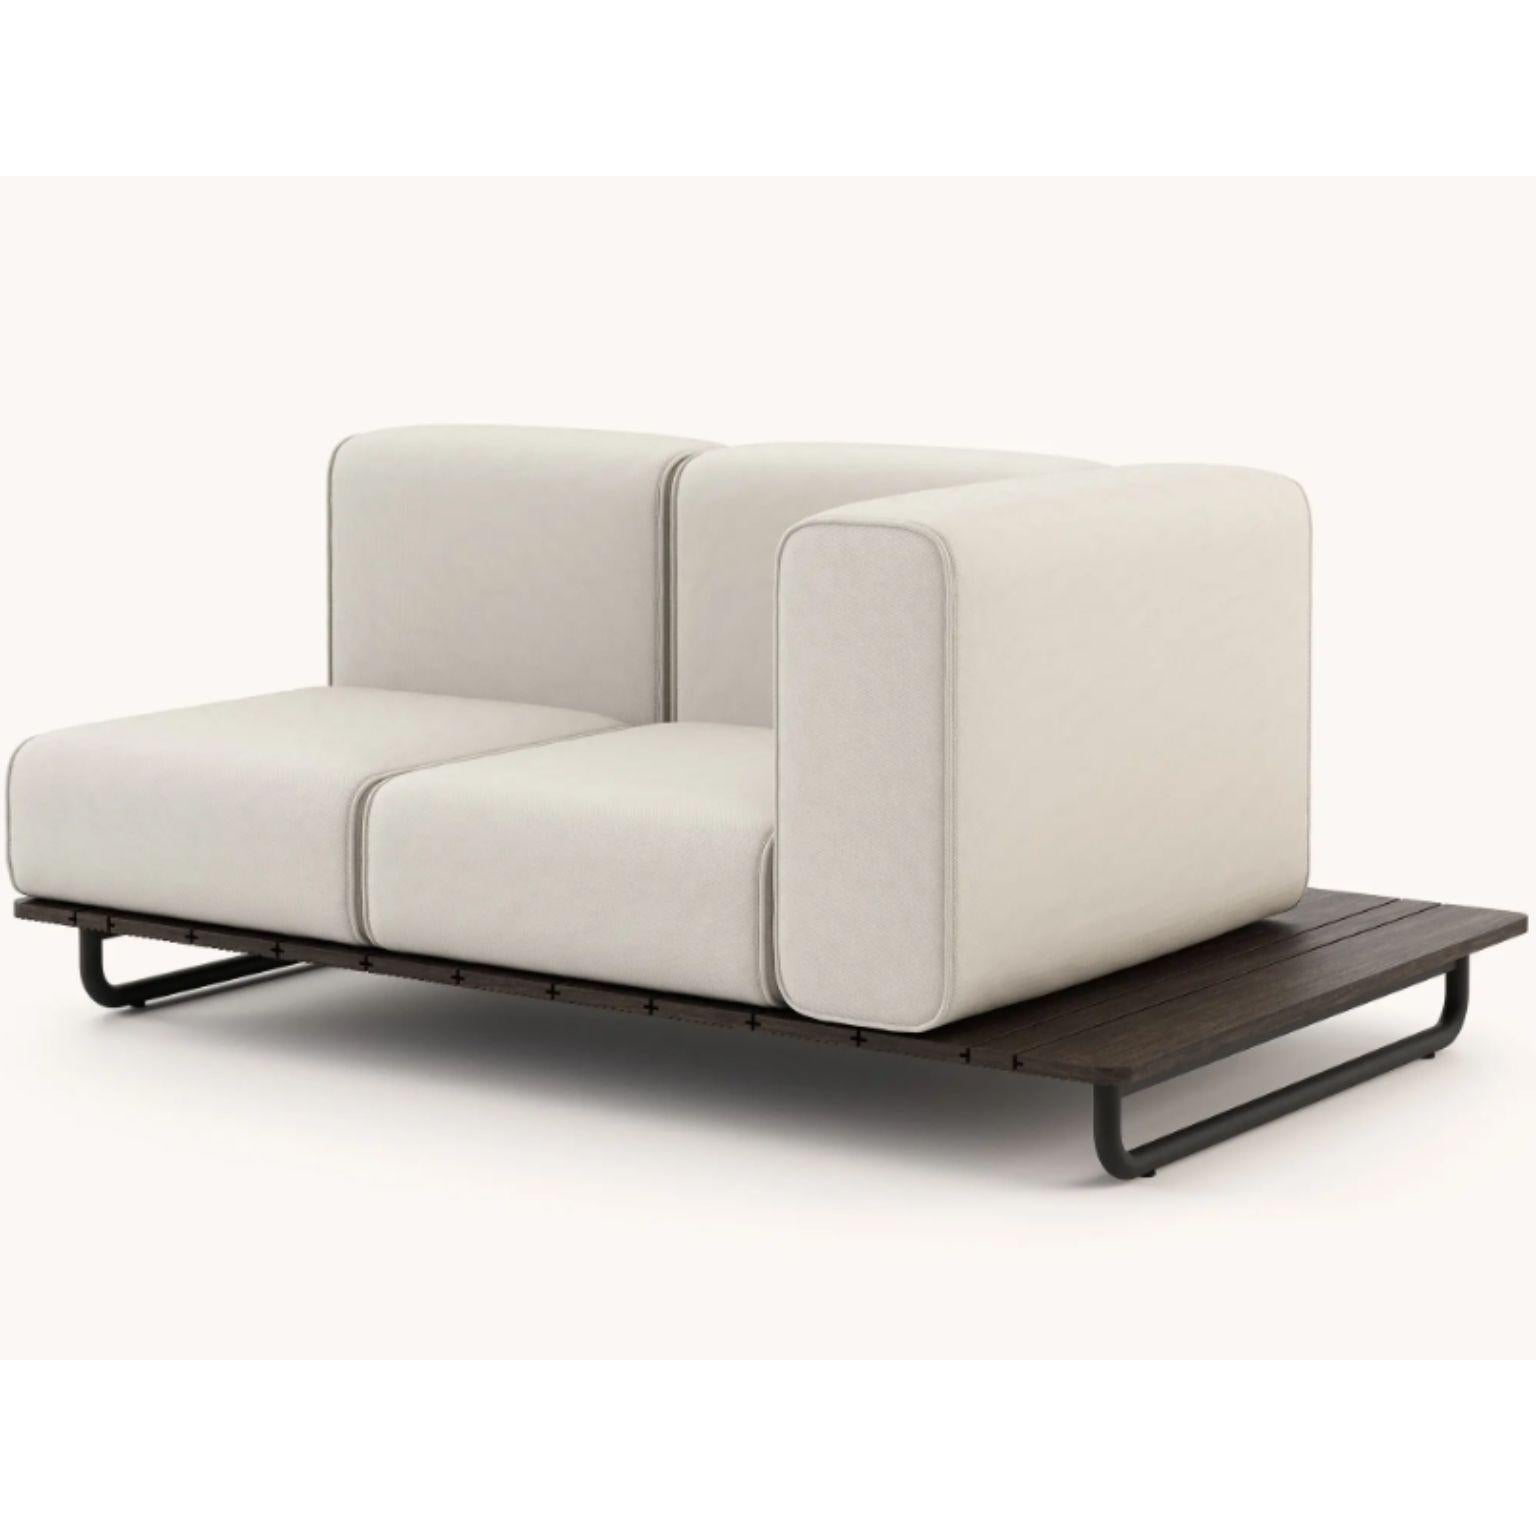 Copacabana sofa with 1 Arm Left by Domkapa
Materials: Black texturized steel, bamboo wood, fabric (Rhine Ice).
Dimensions: W 165 x D 105 x H 75 cm.
Also available in different materials. 

Copacabana Sofa with or without armrest is an exclusive